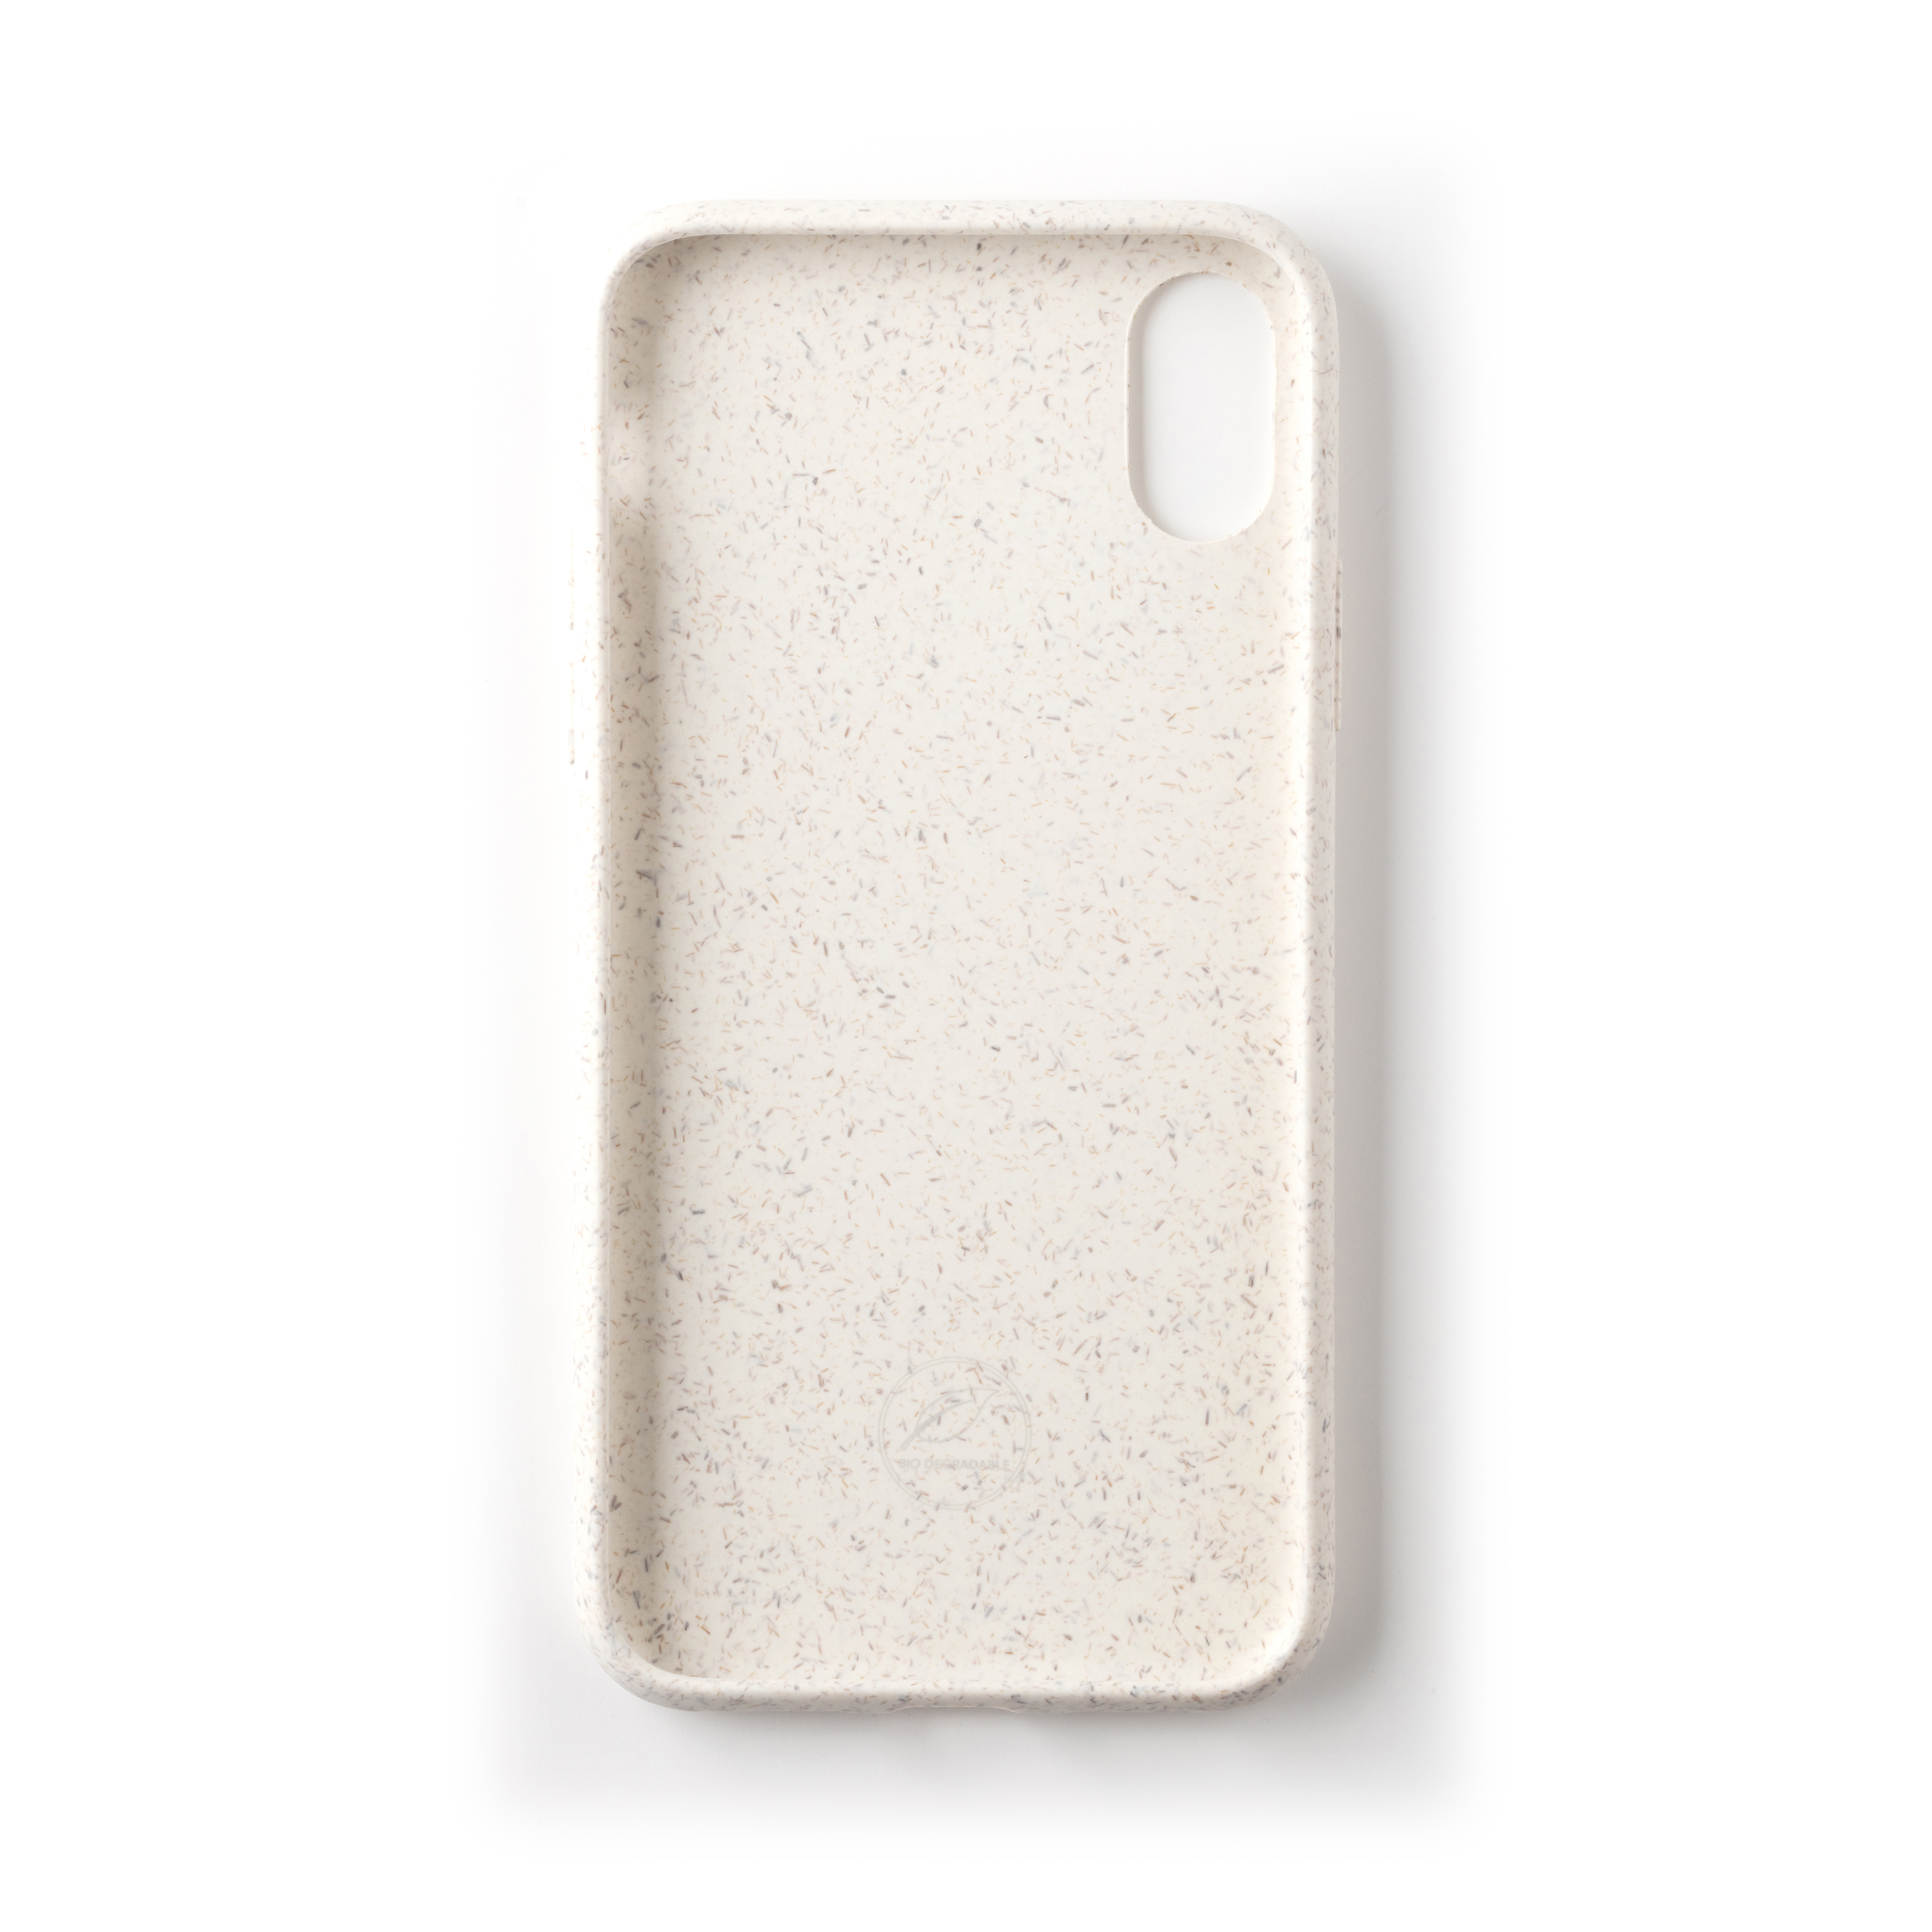 ECO FASHION BY WILMA RIPXS, X/XS, iPhone Apple, Backcover, white